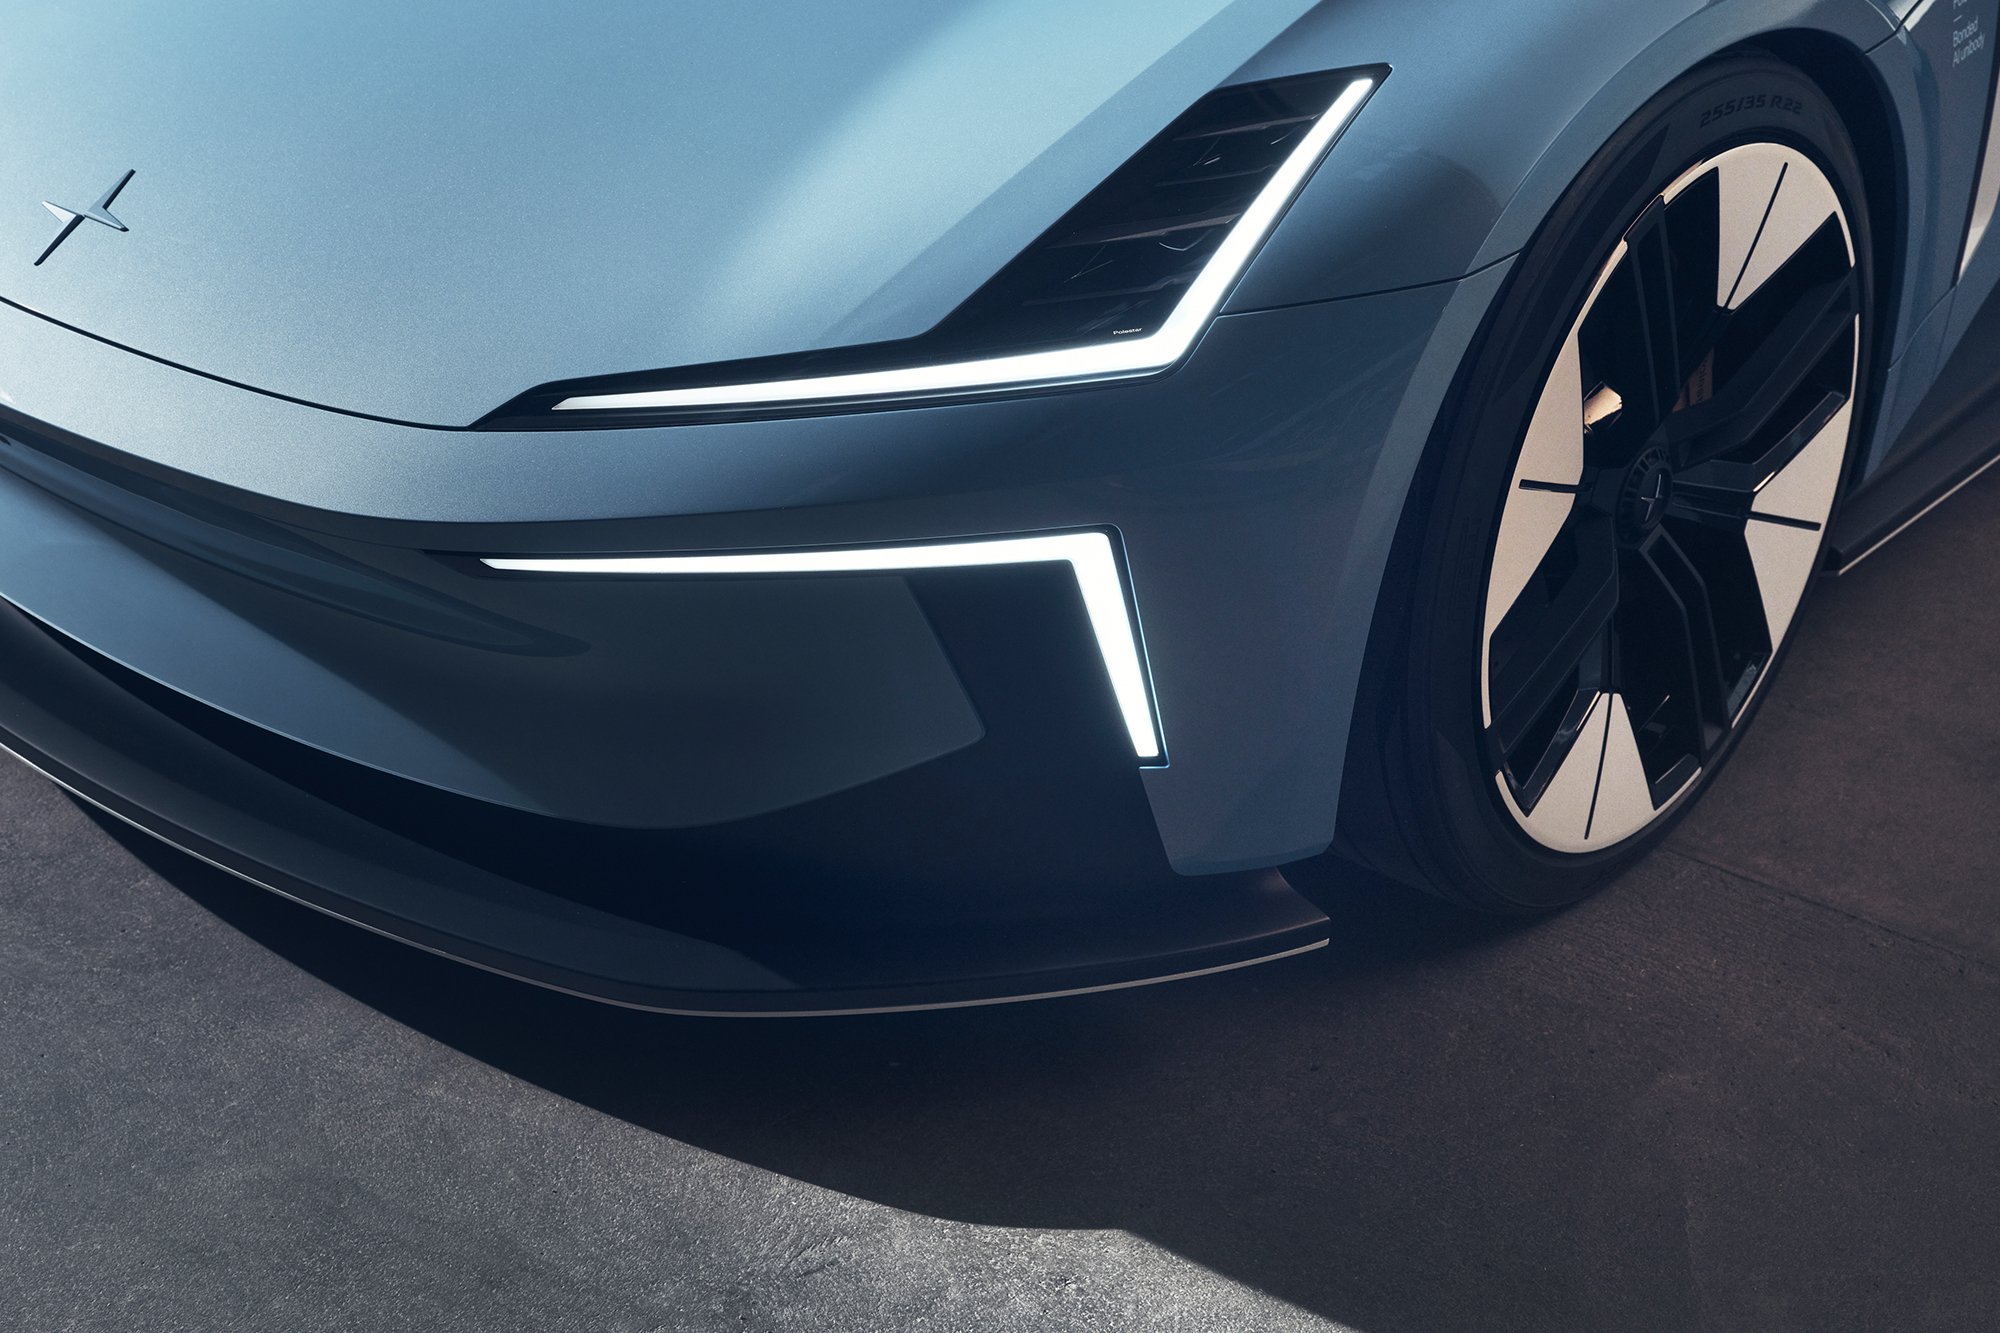 The front lights of the electric roadster Polestar 02